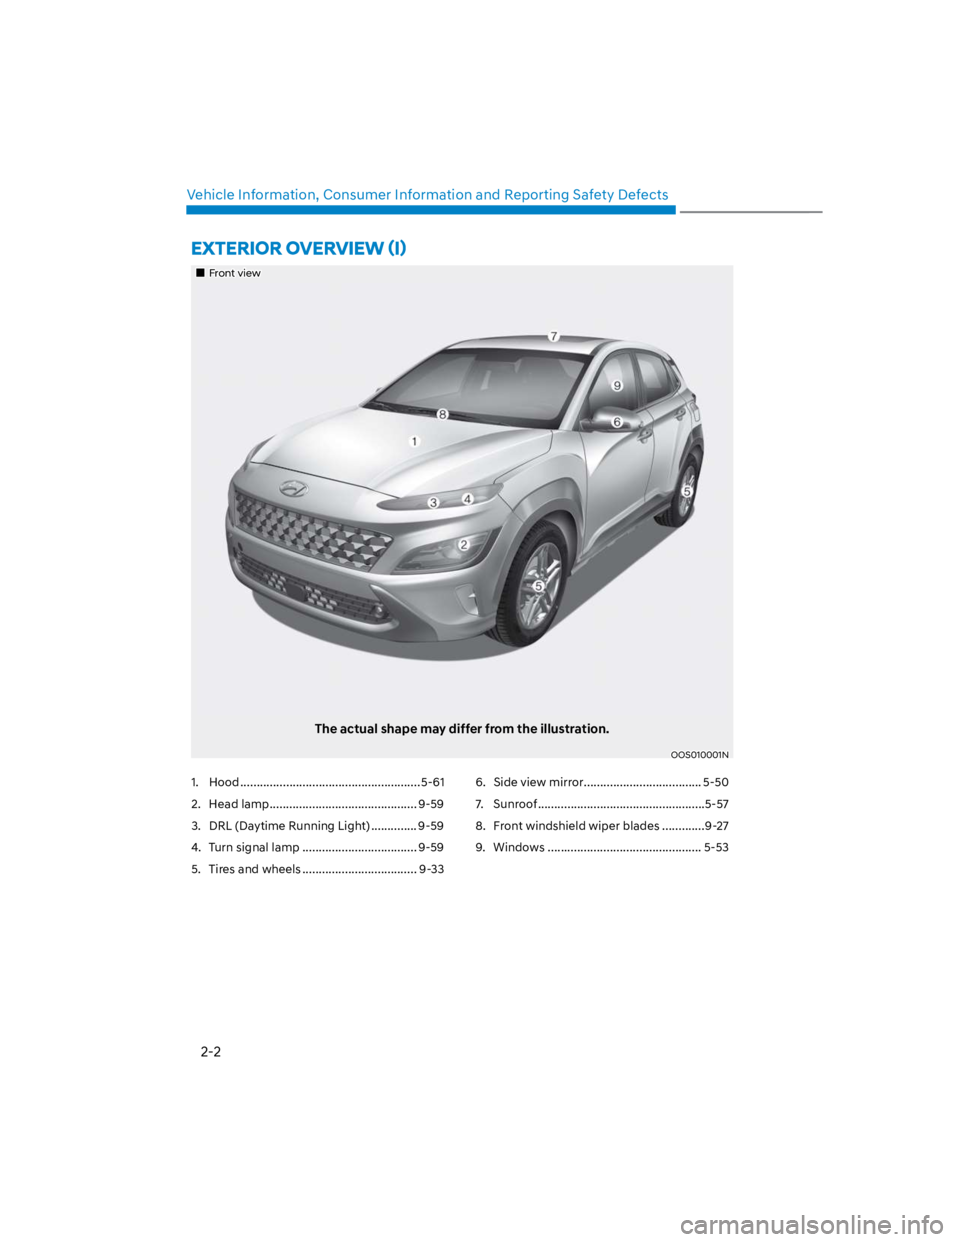 HYUNDAI KONA 2022  Owners Manual 2-2
Vehicle Information, Consumer Information and Reporting Safety Defects
Front view 
 
The actual shape may differ from the illustration.
OOS010001N 
1.  Hood .......................................